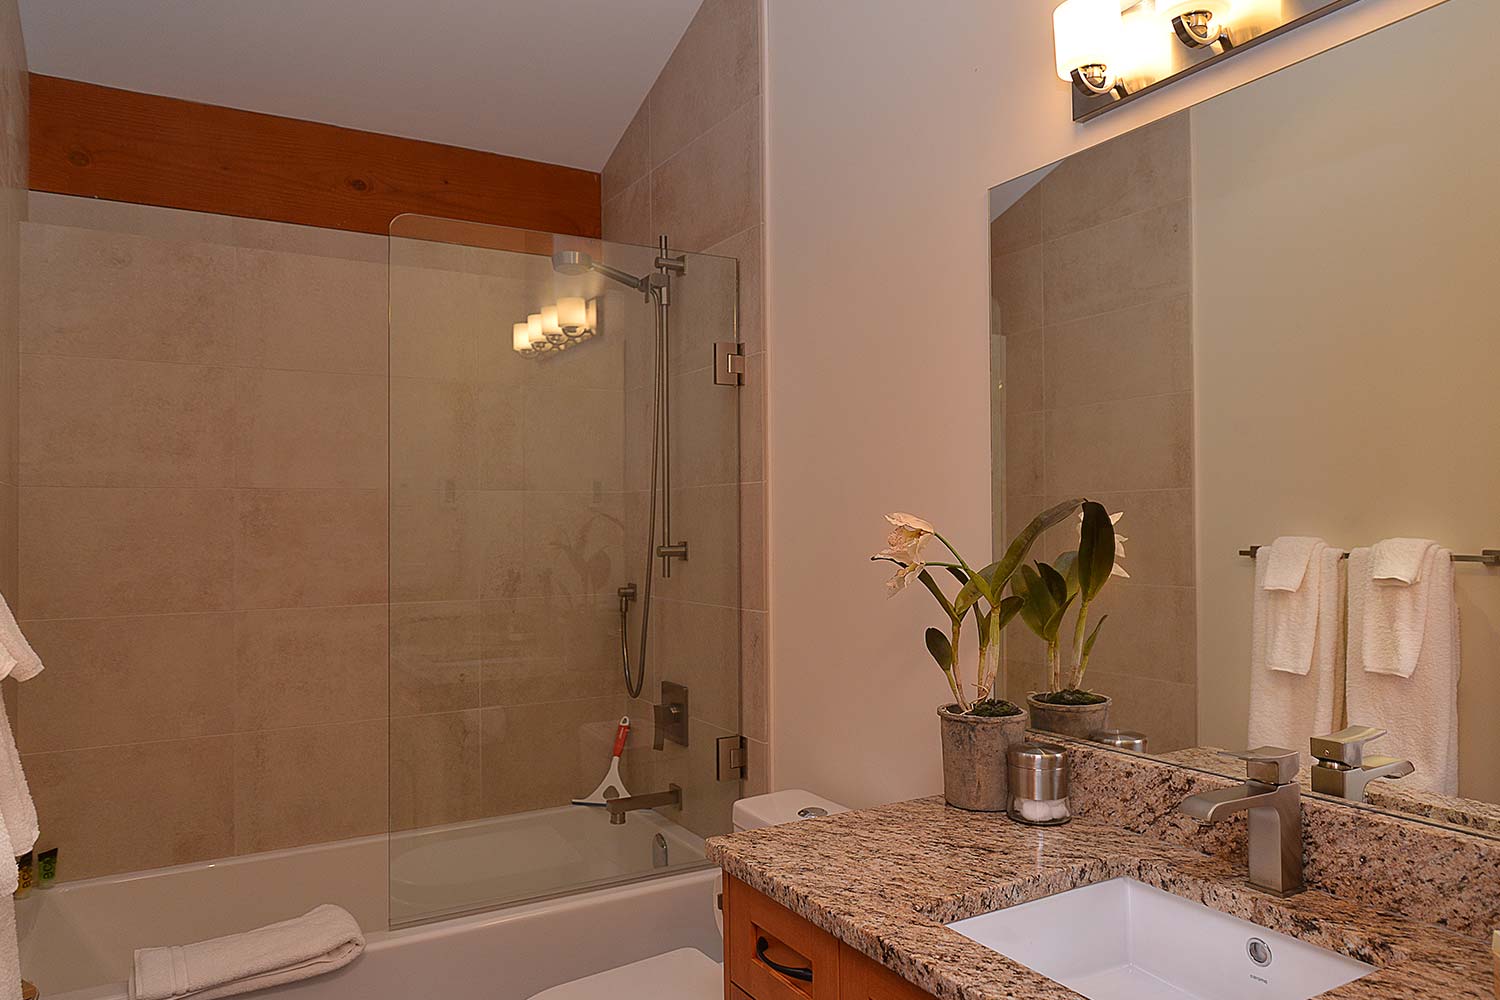 The bathroom of this home for rent by a private owner features a large shower/bath and granite-style countertop.